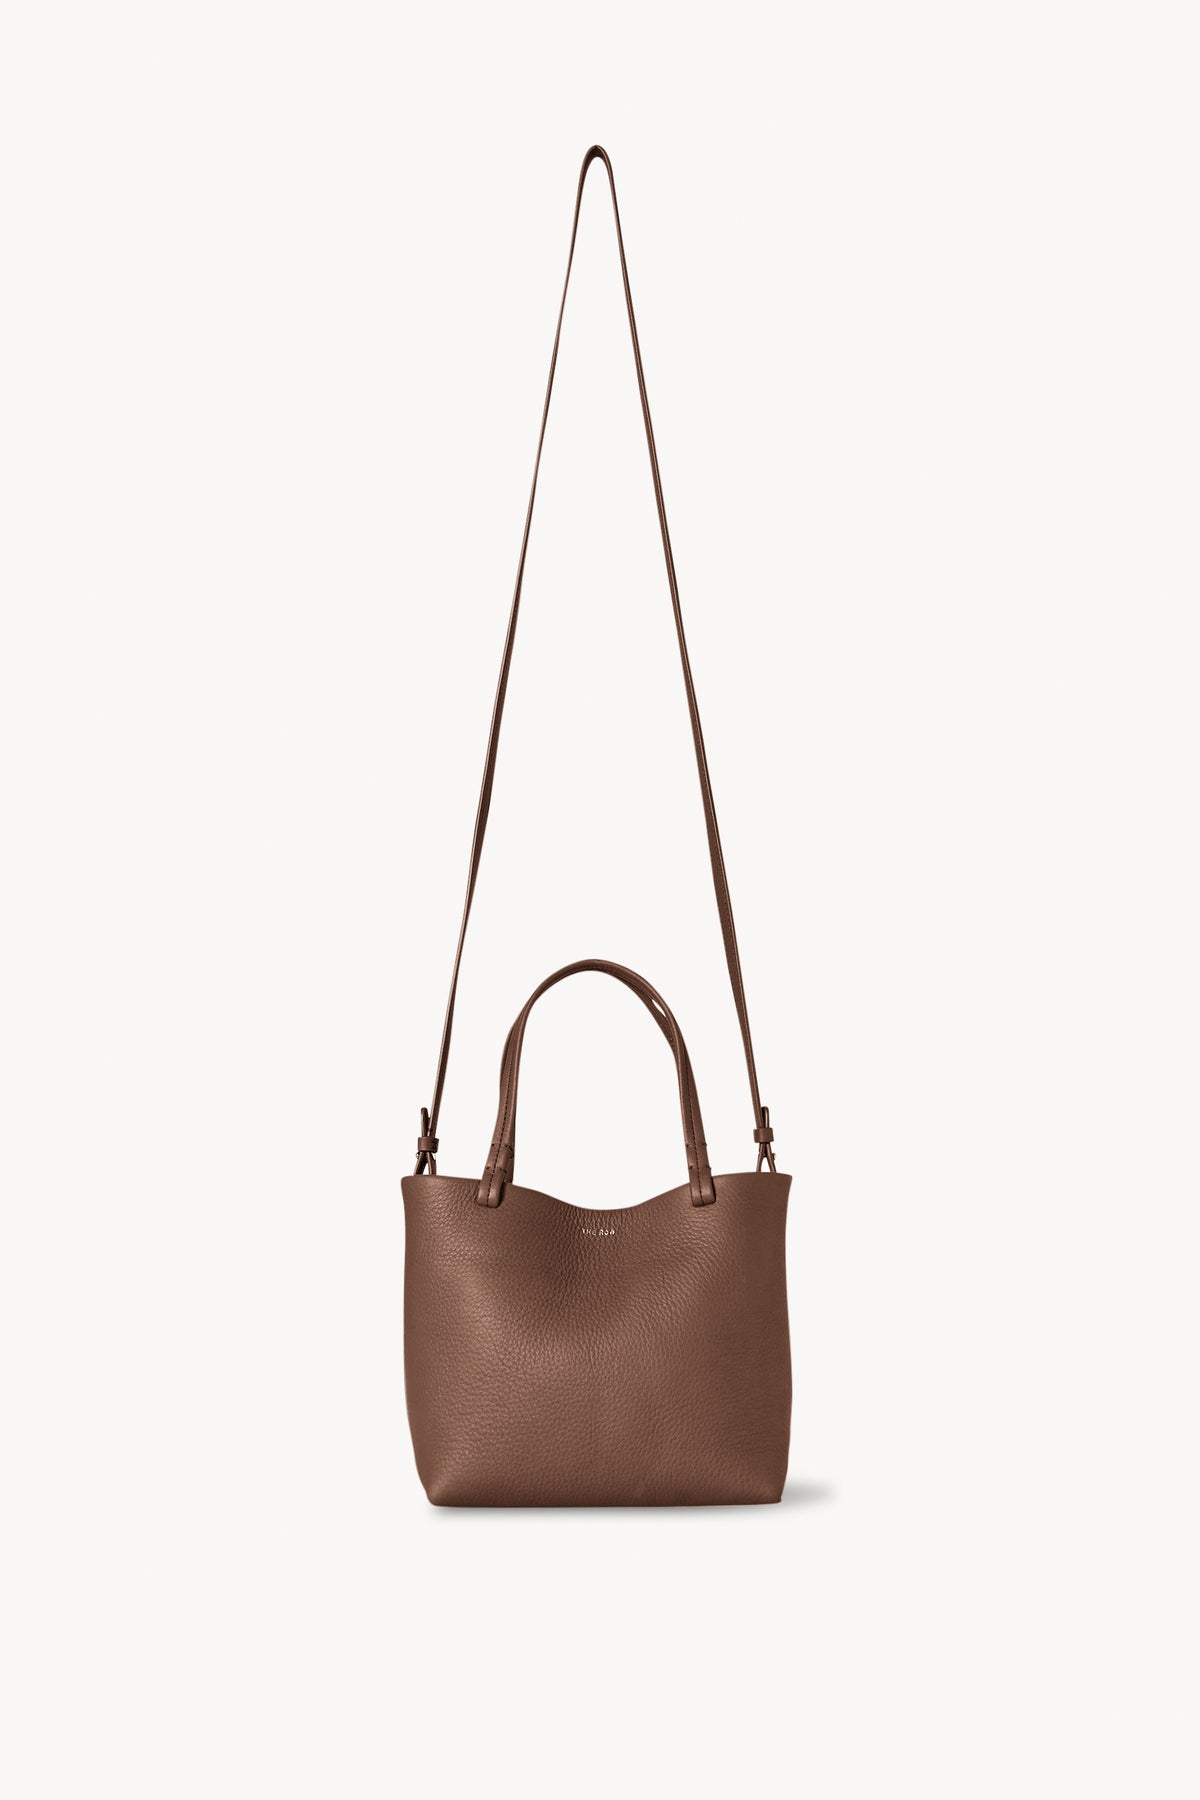 The Row Women's Small Park Leather Tote Bag - Taupe